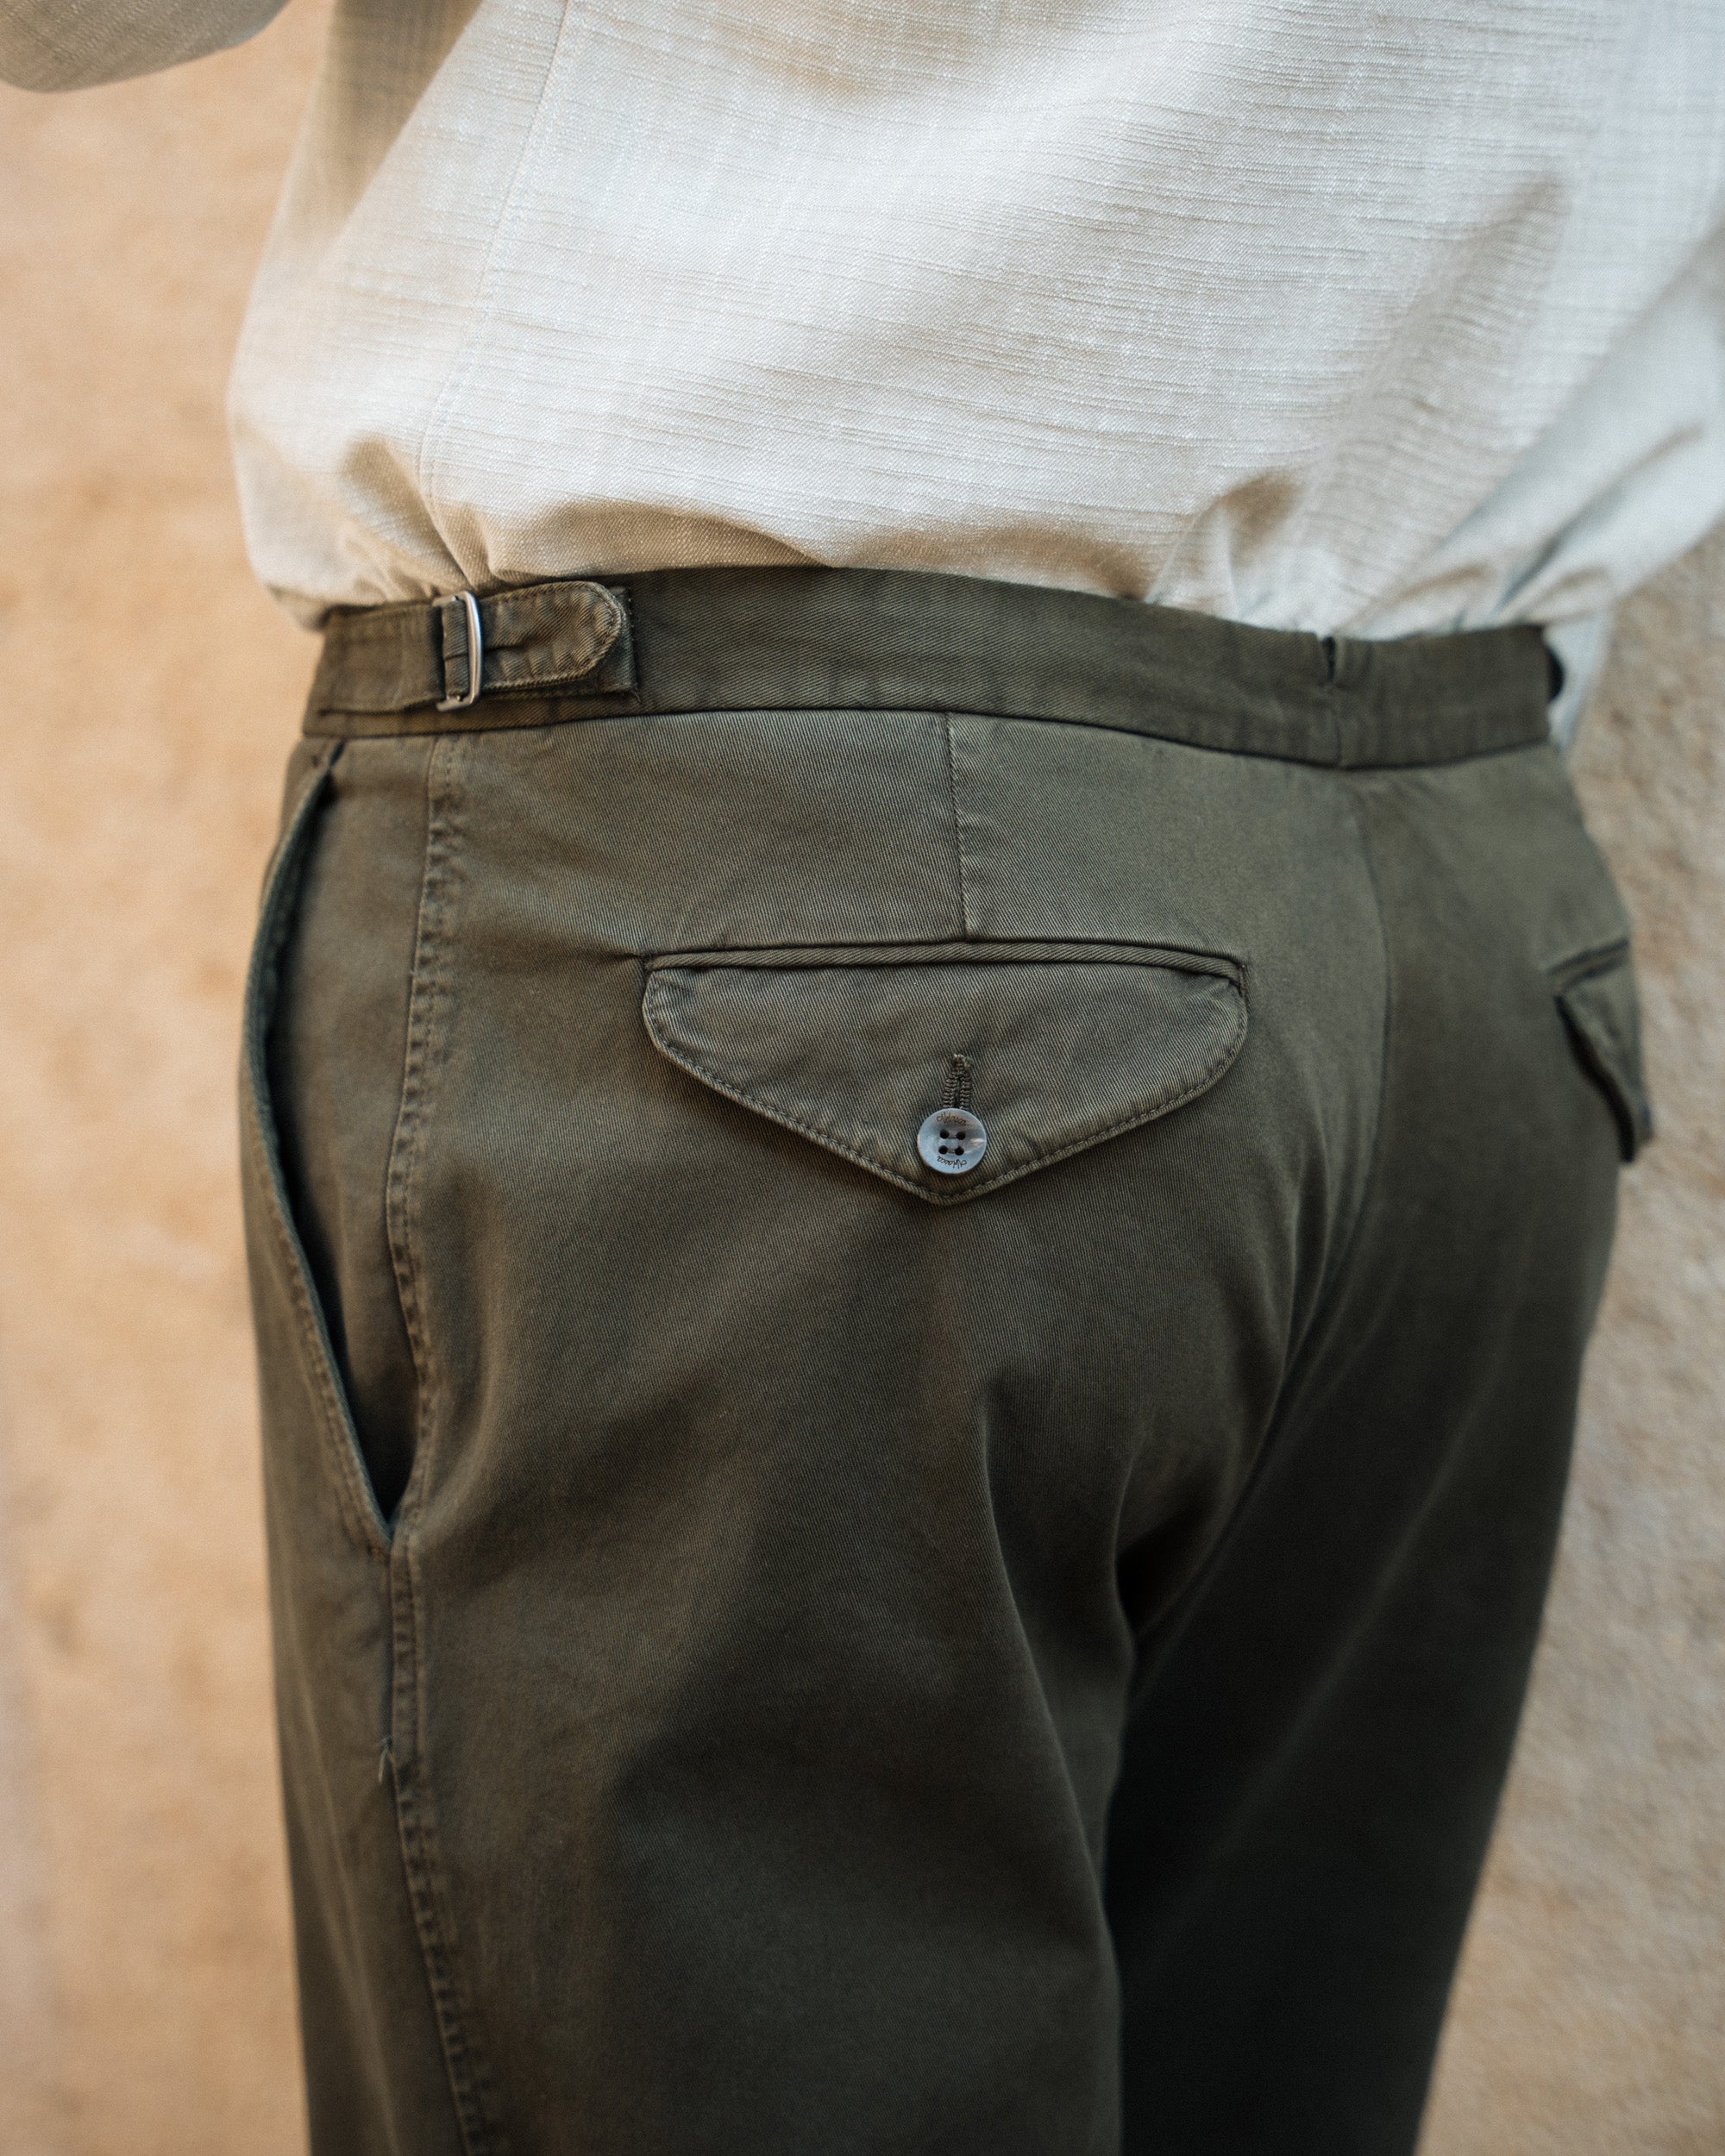 Velasca | Green chino pants, straight-leg. Made in Italy